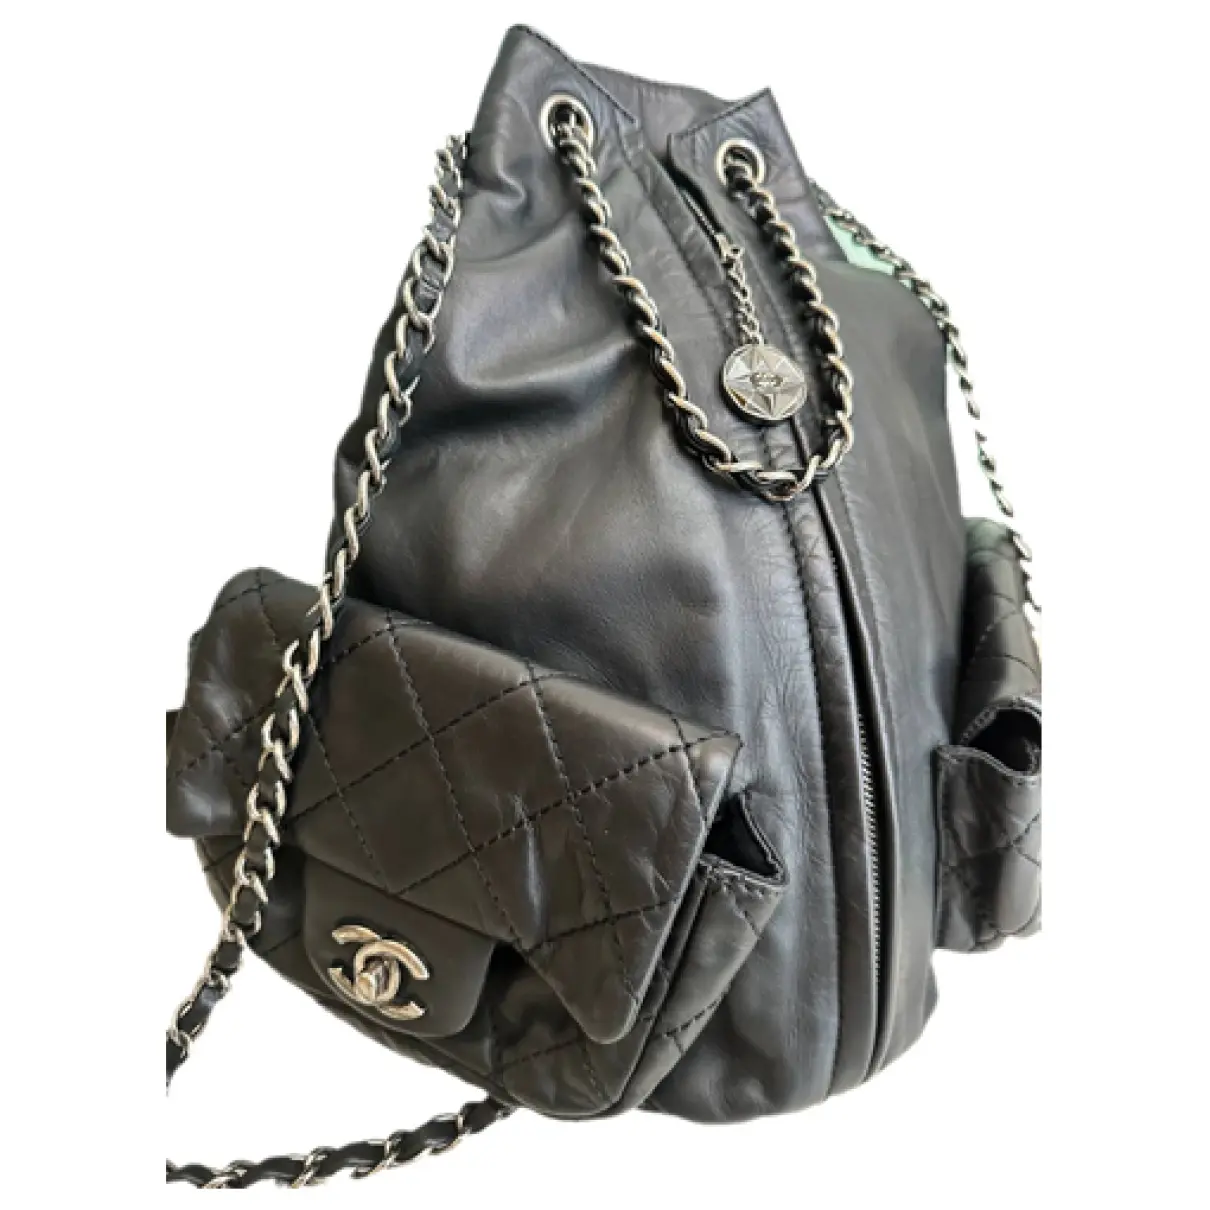 Timeless/Classique Chain leather backpack